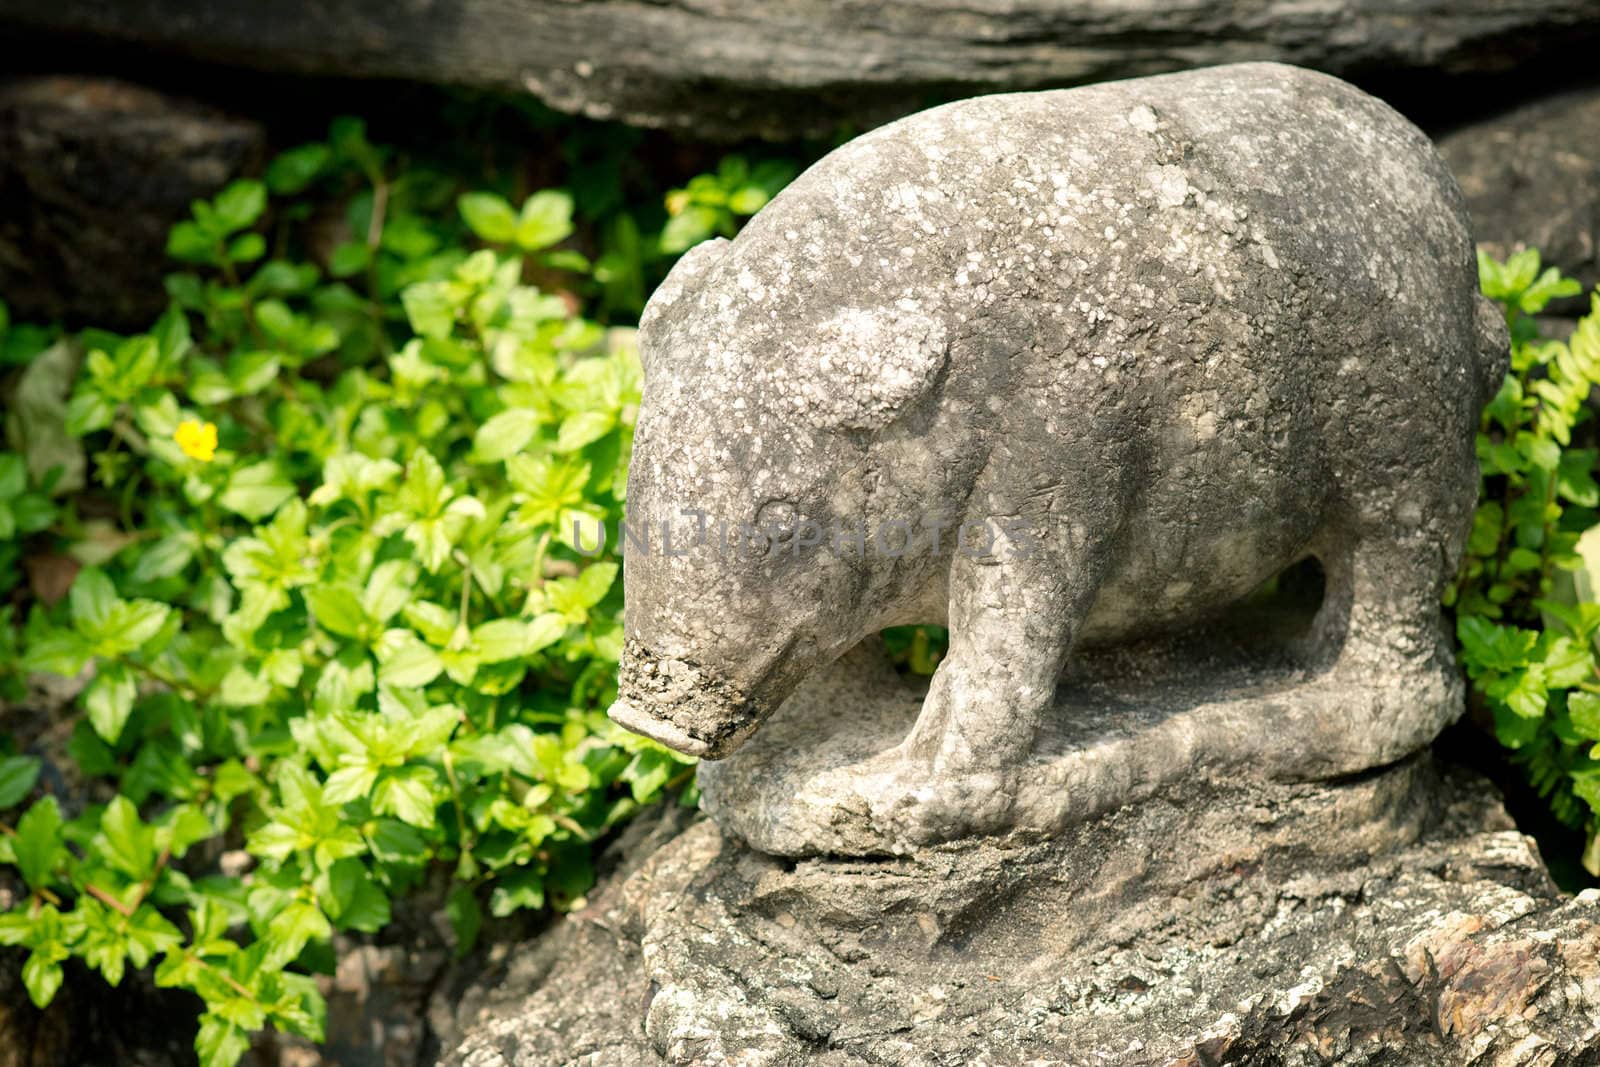 Stone statue of a pig in Grand palace, Bangkok, Thailand